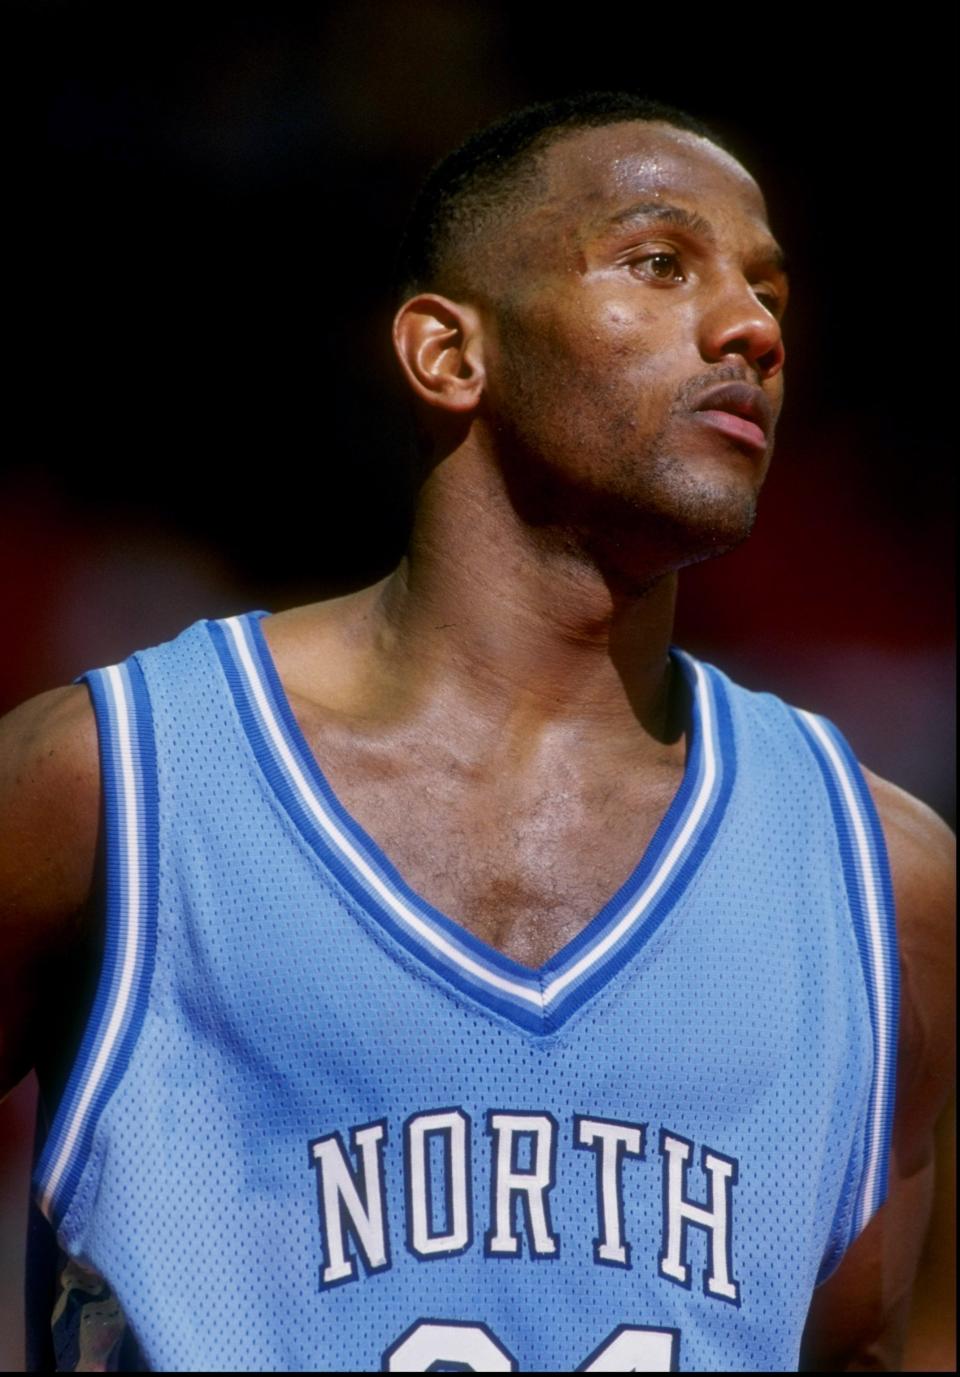 George Lynch of the North Carolina Tar Heels stands on the court during a game against the Maryland Terrapins at the Cole Field House in College Park, Maryland. Doug Pensinger /Allsport